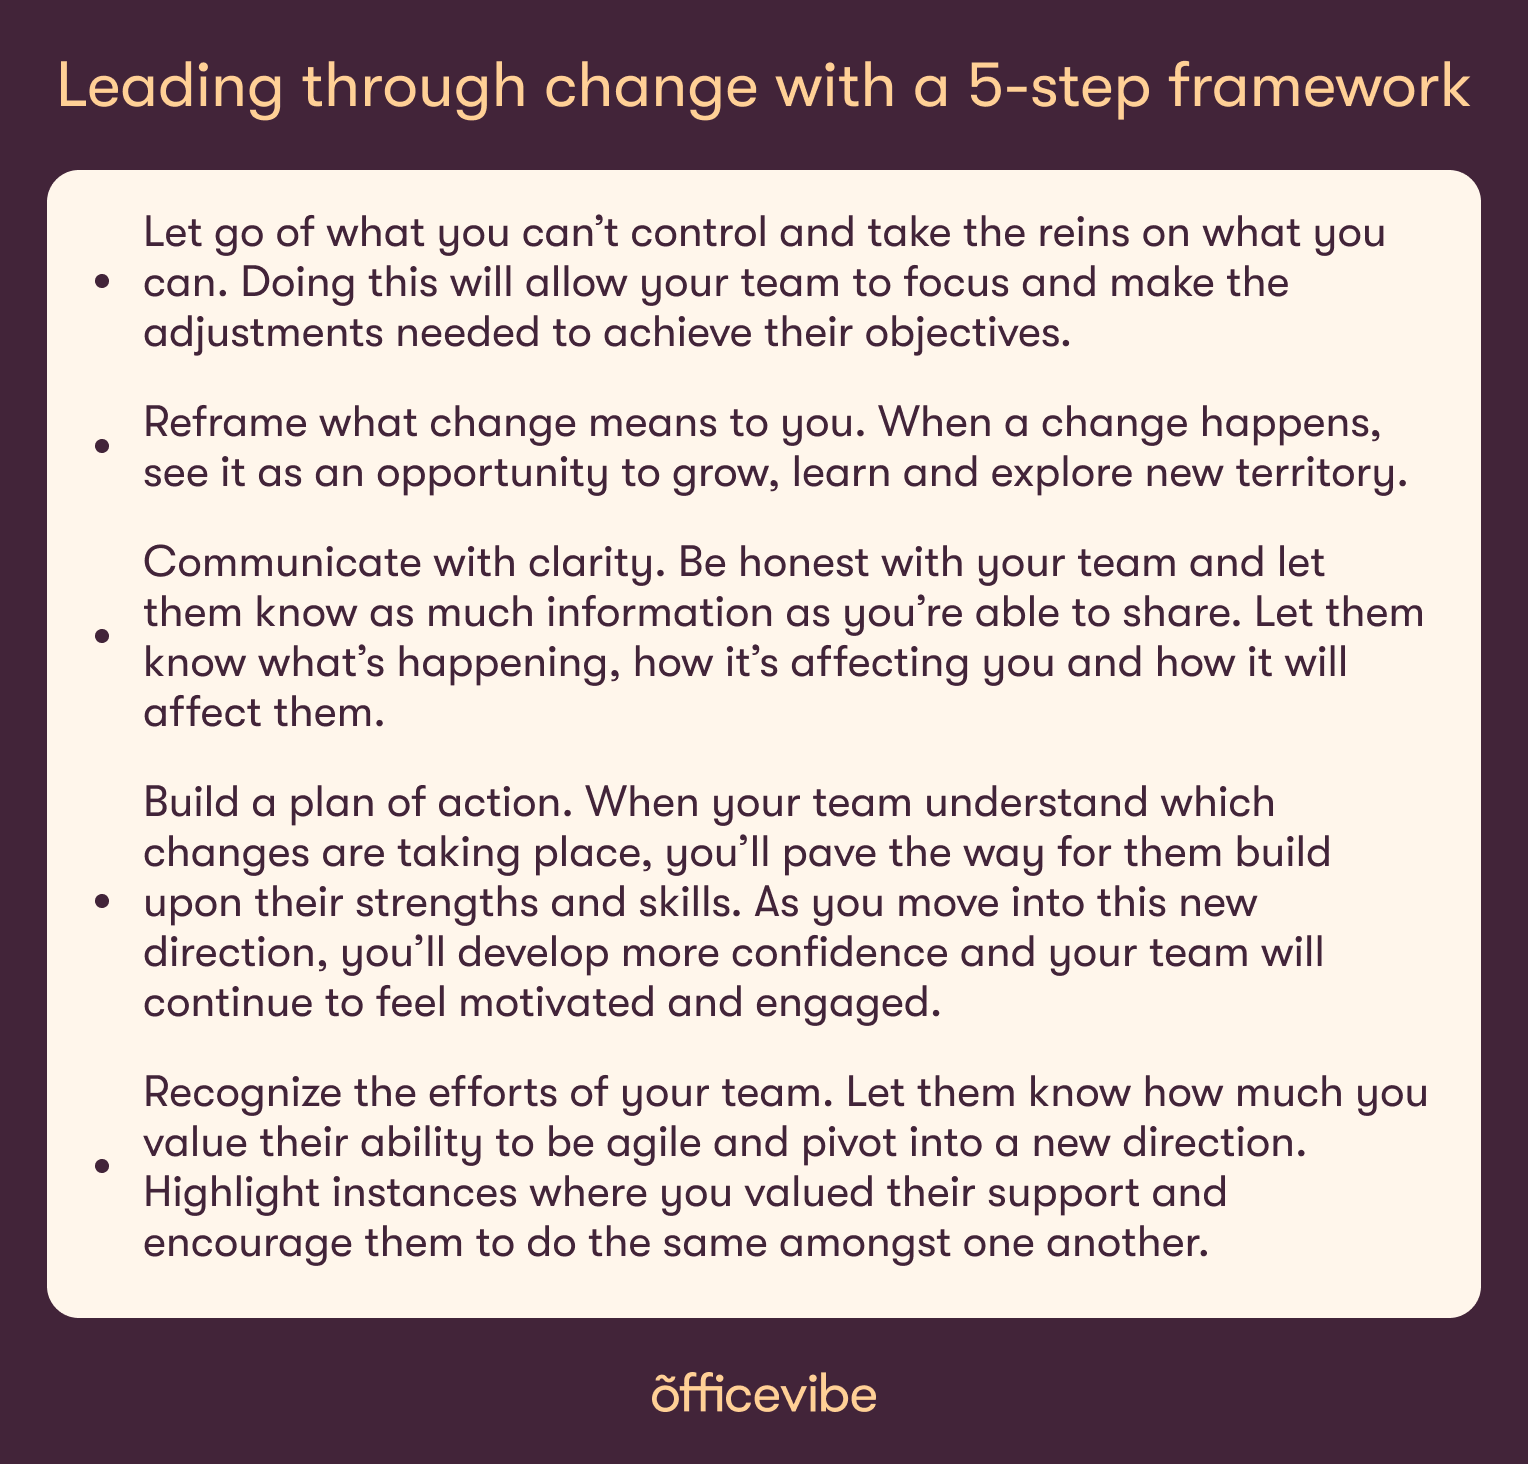 Key takeways about how to lead through change